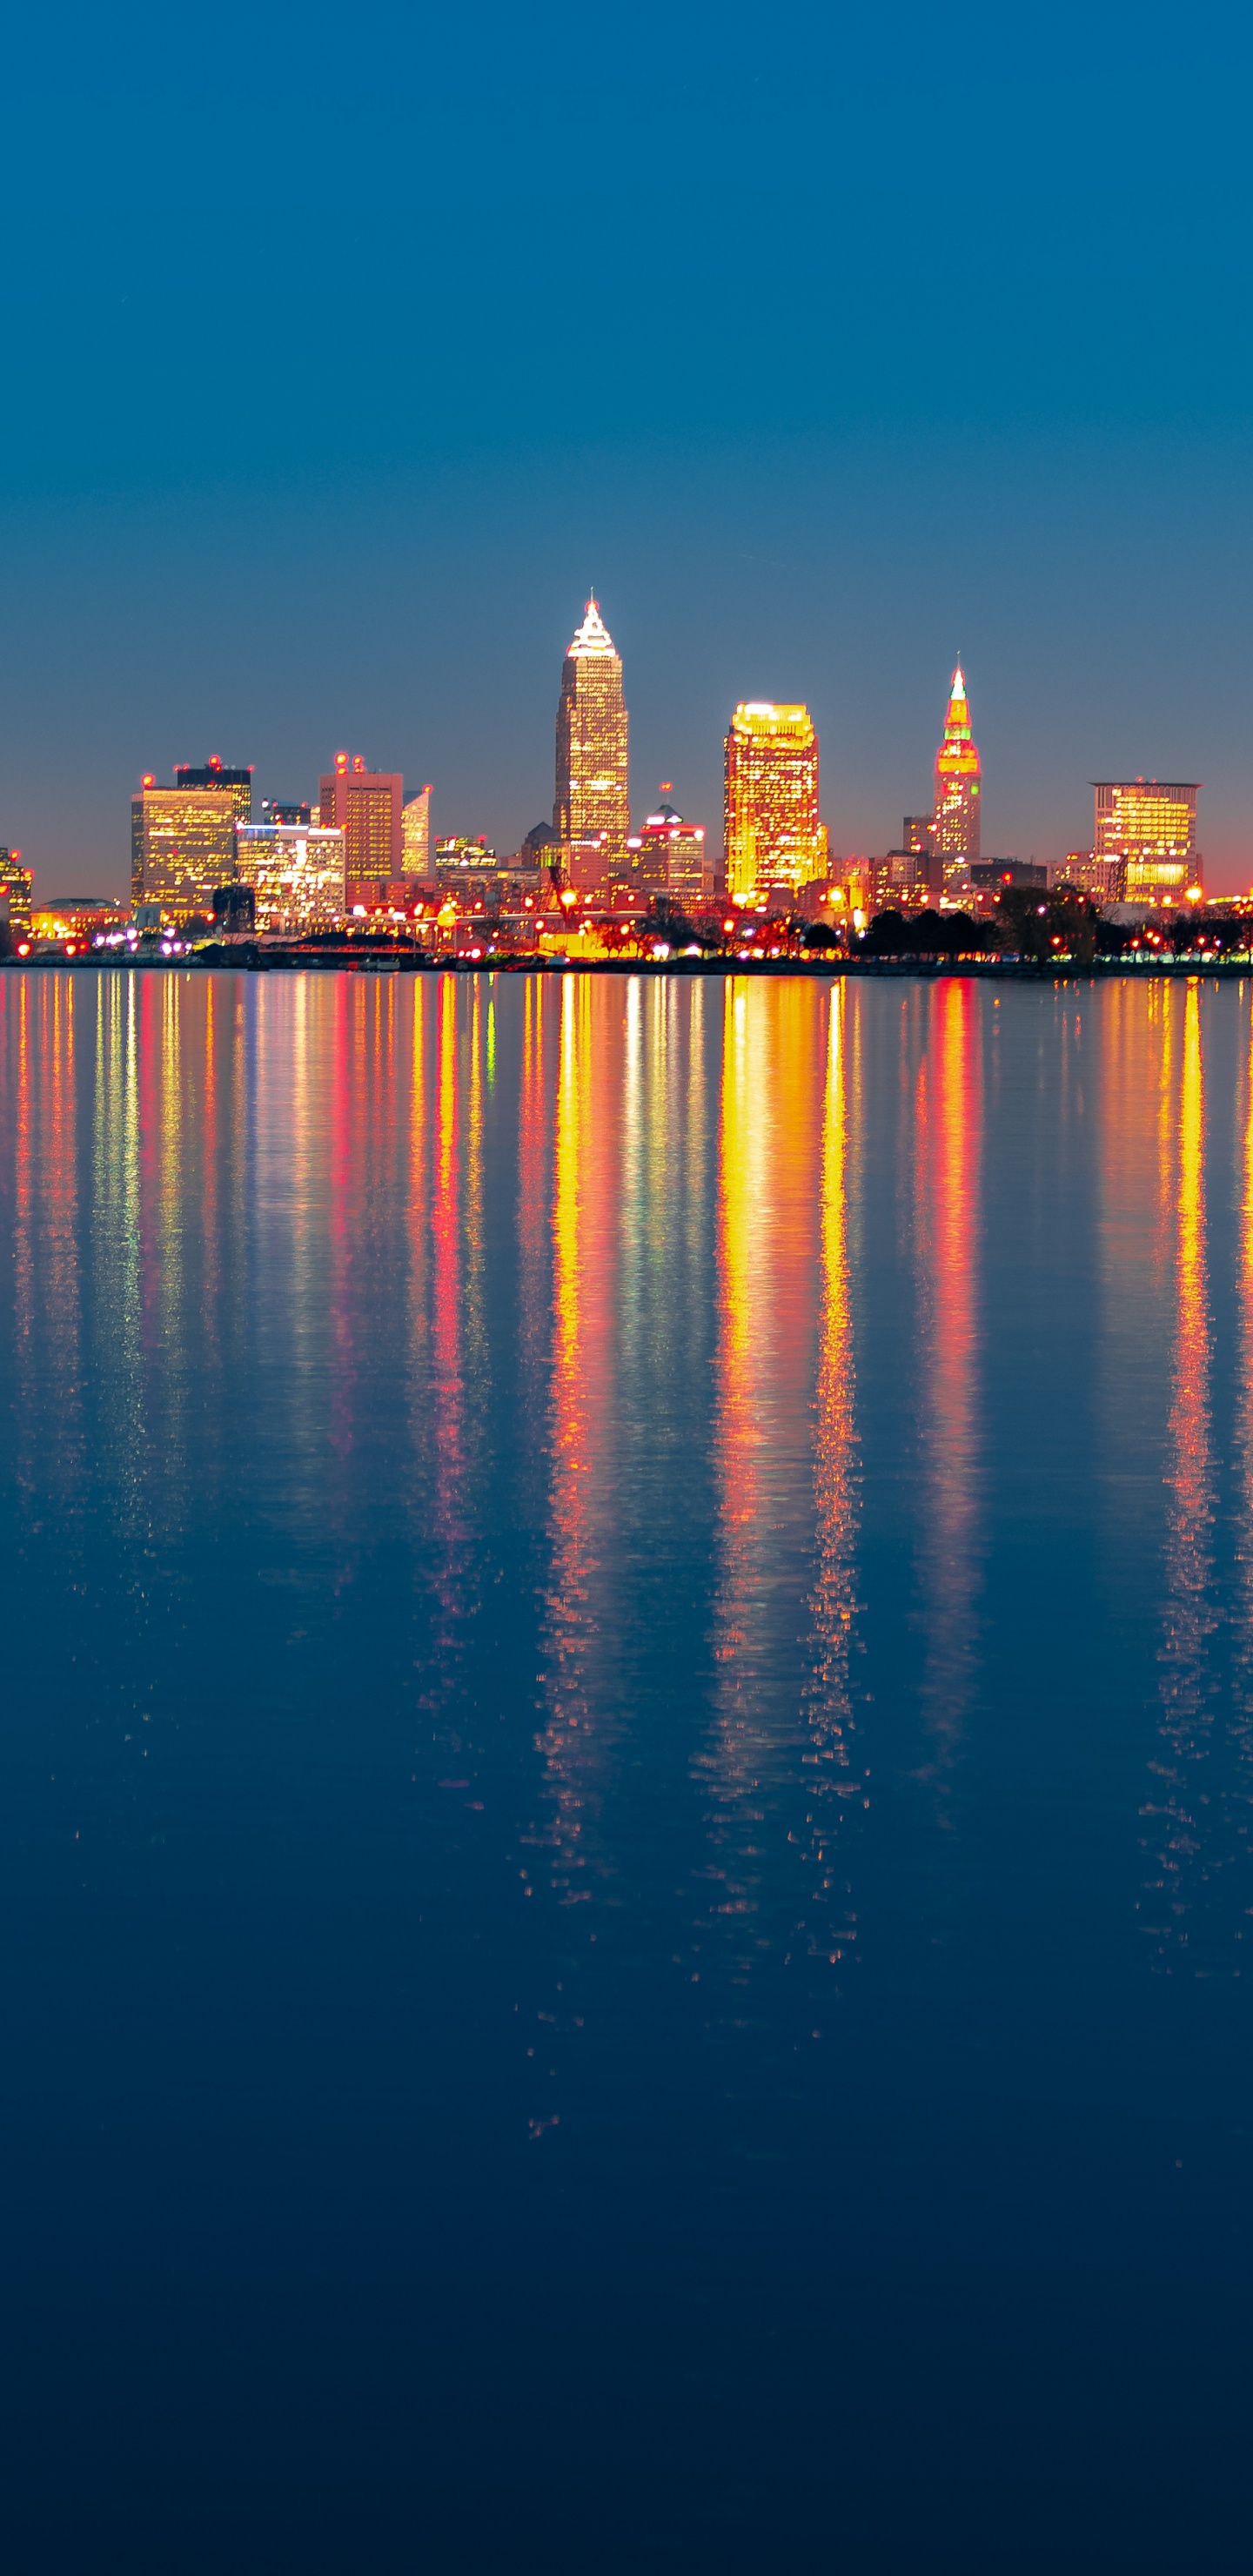 City Skyline Across Body of Water During Night Time. Wallpaper in 1440x2960 Resolution